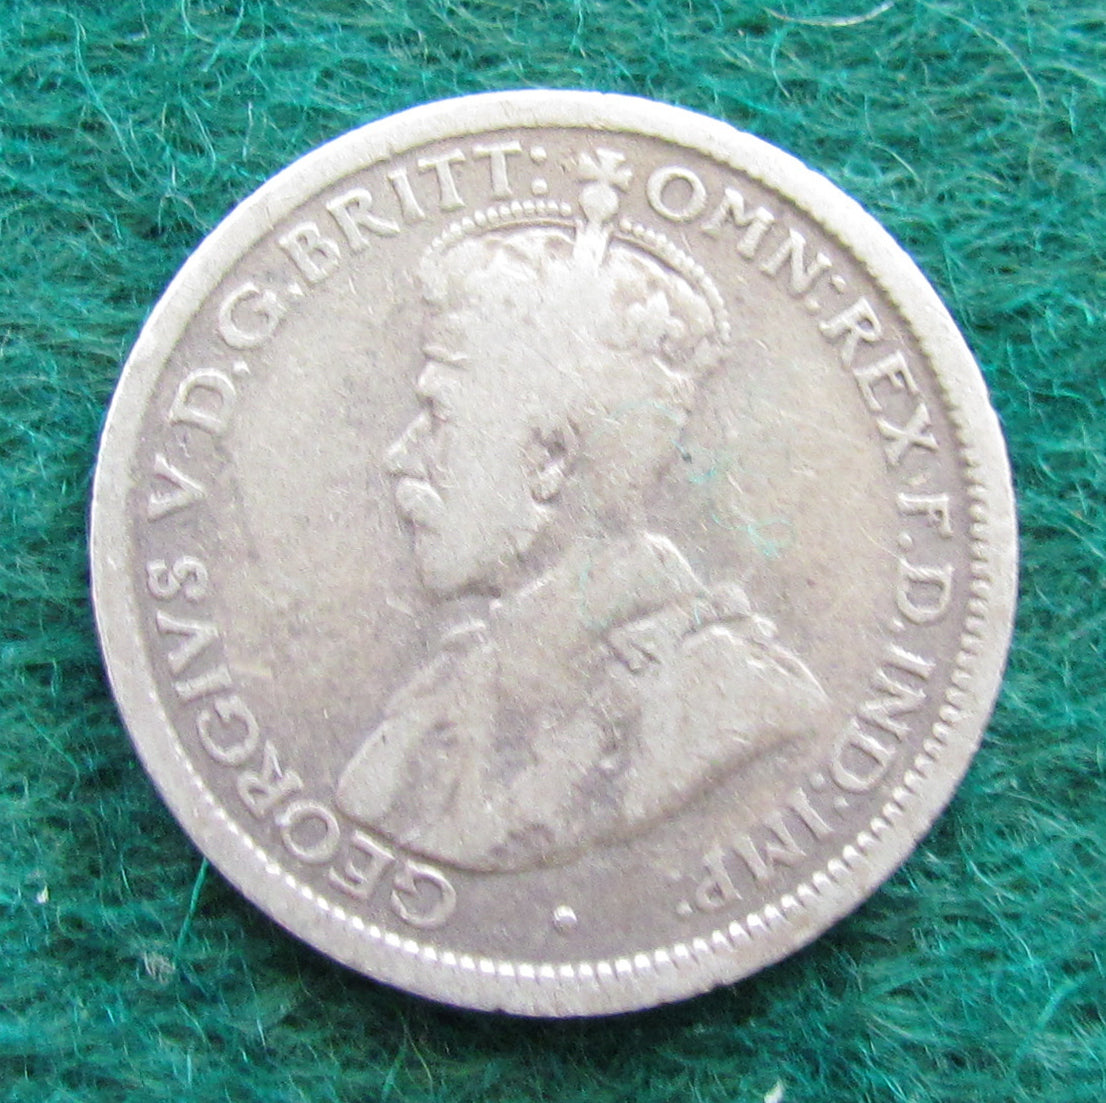 Australian 1919 M 6d Sixpence King George V Coin - Circulated